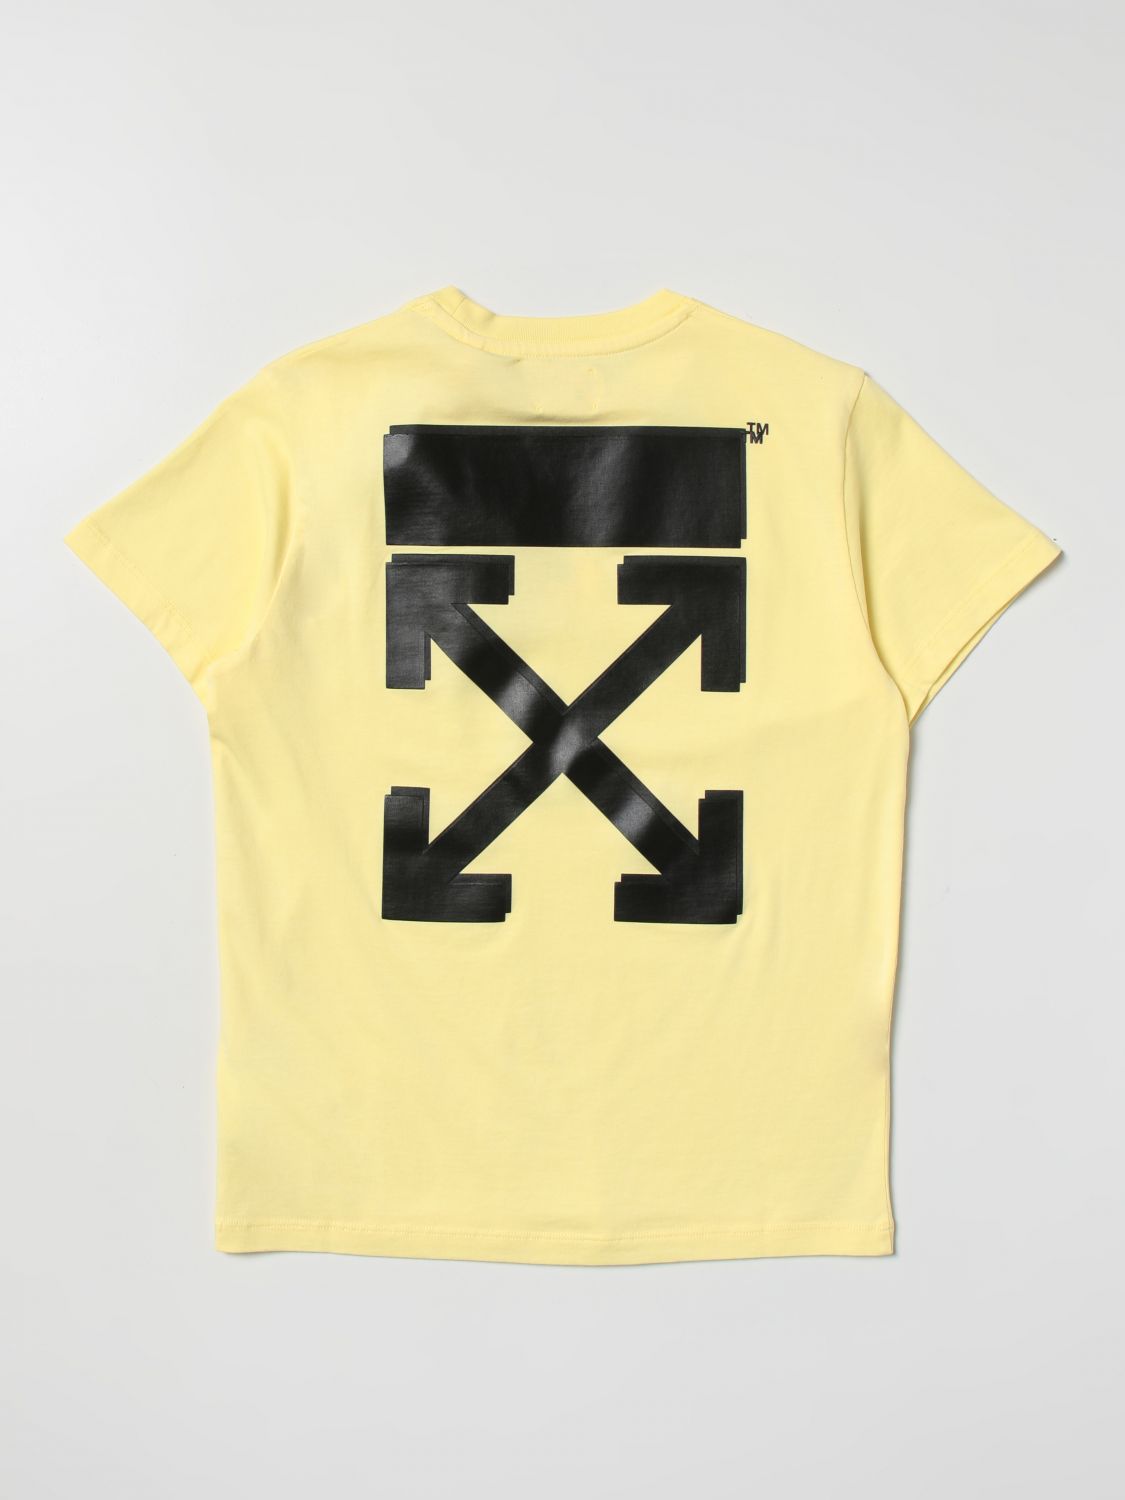 OFF-WHITE: t-shirt for boys - Yellow | Off-White t-shirt ...